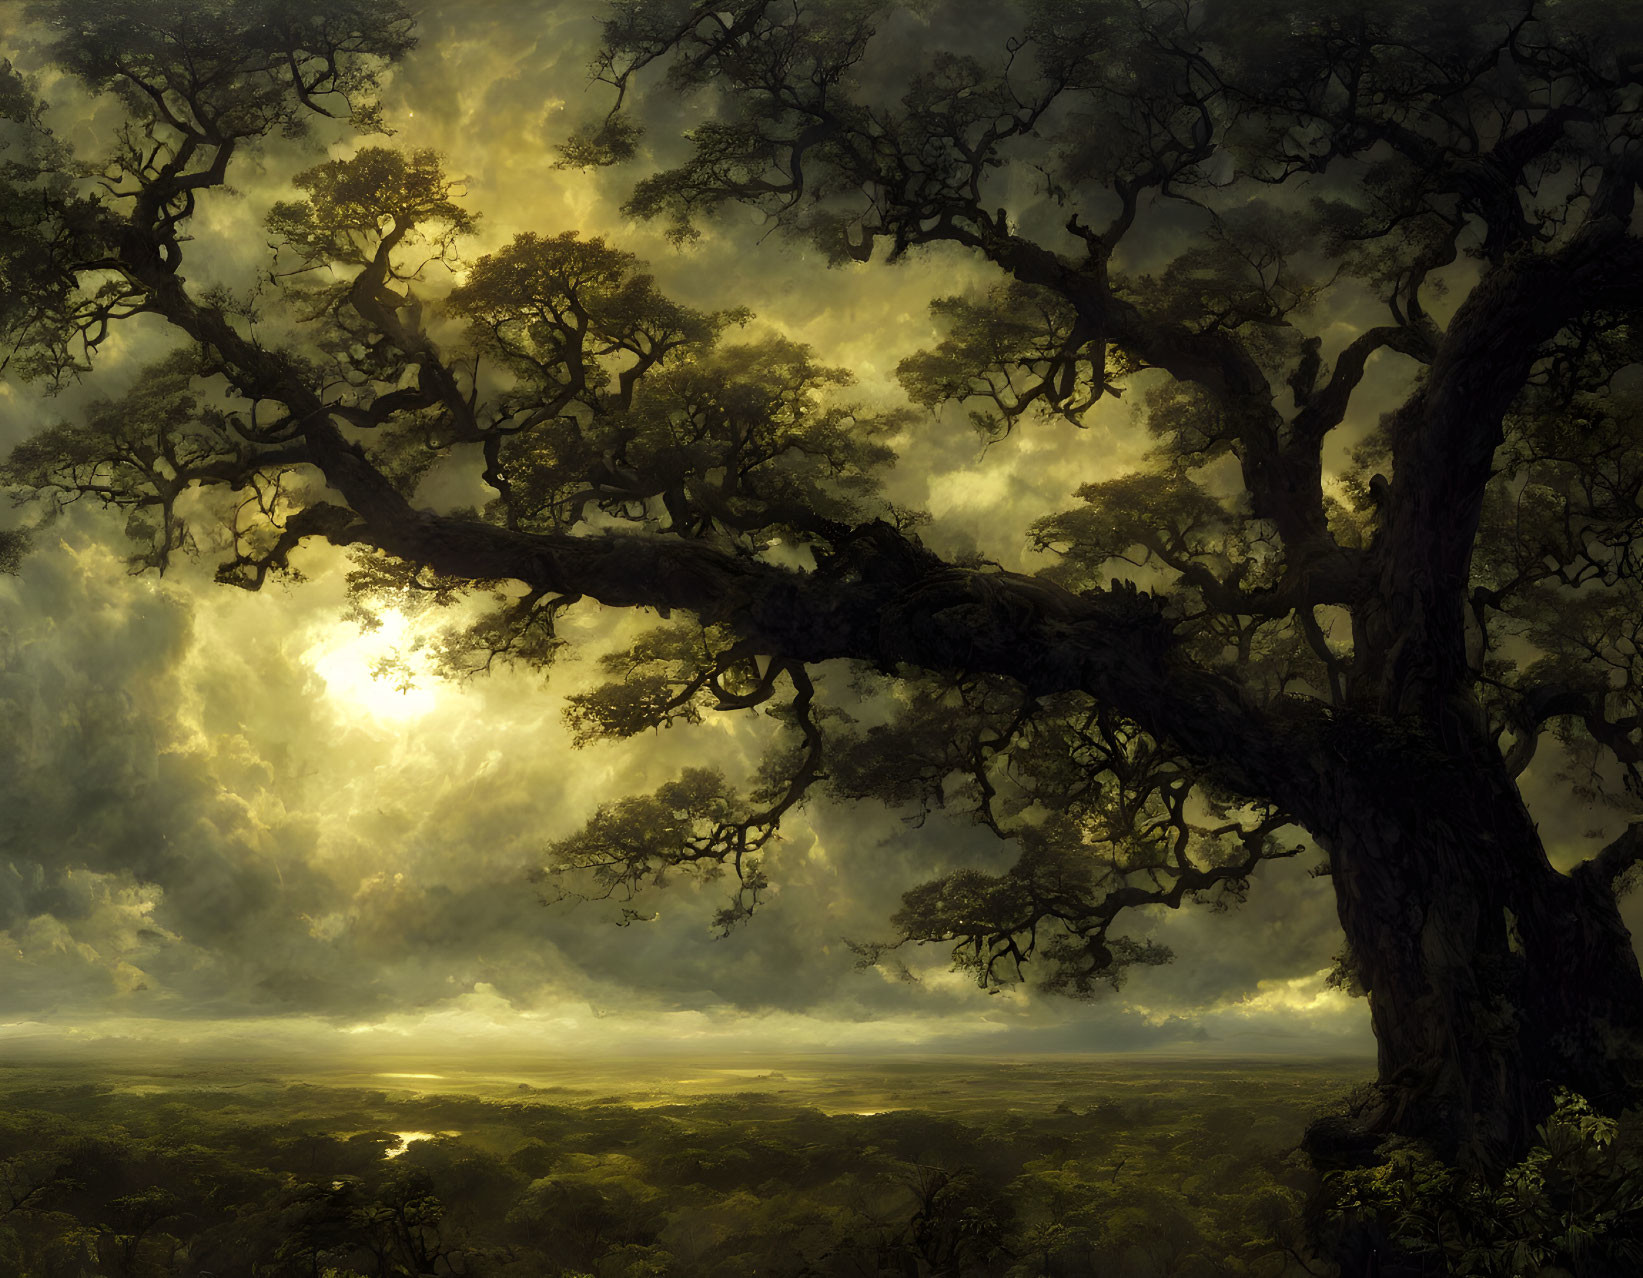 Majestic tree in ethereal landscape with luminescent sky